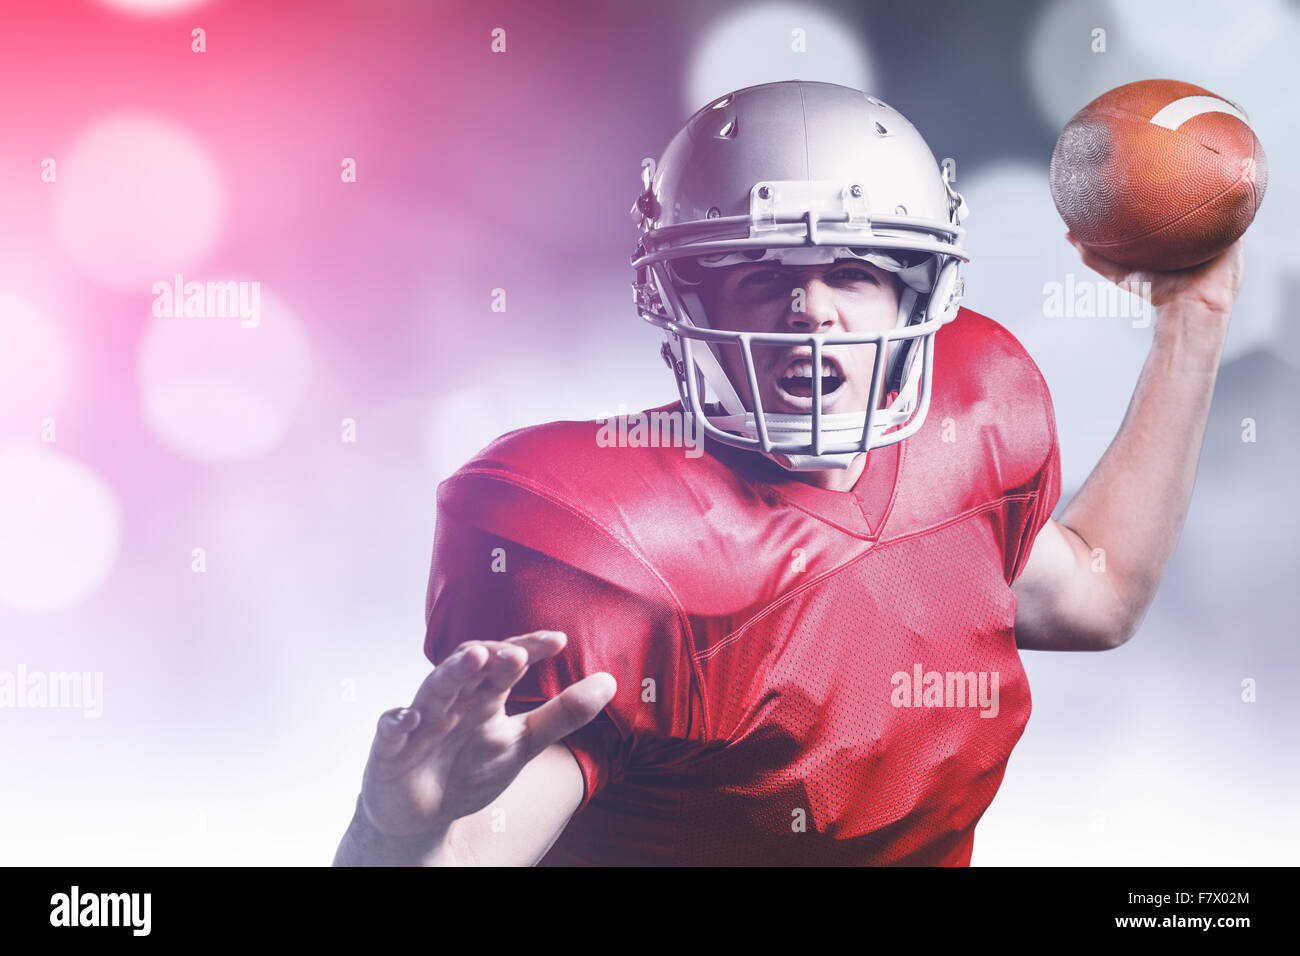 Composite image of american football player throwing ball Banque D'Images